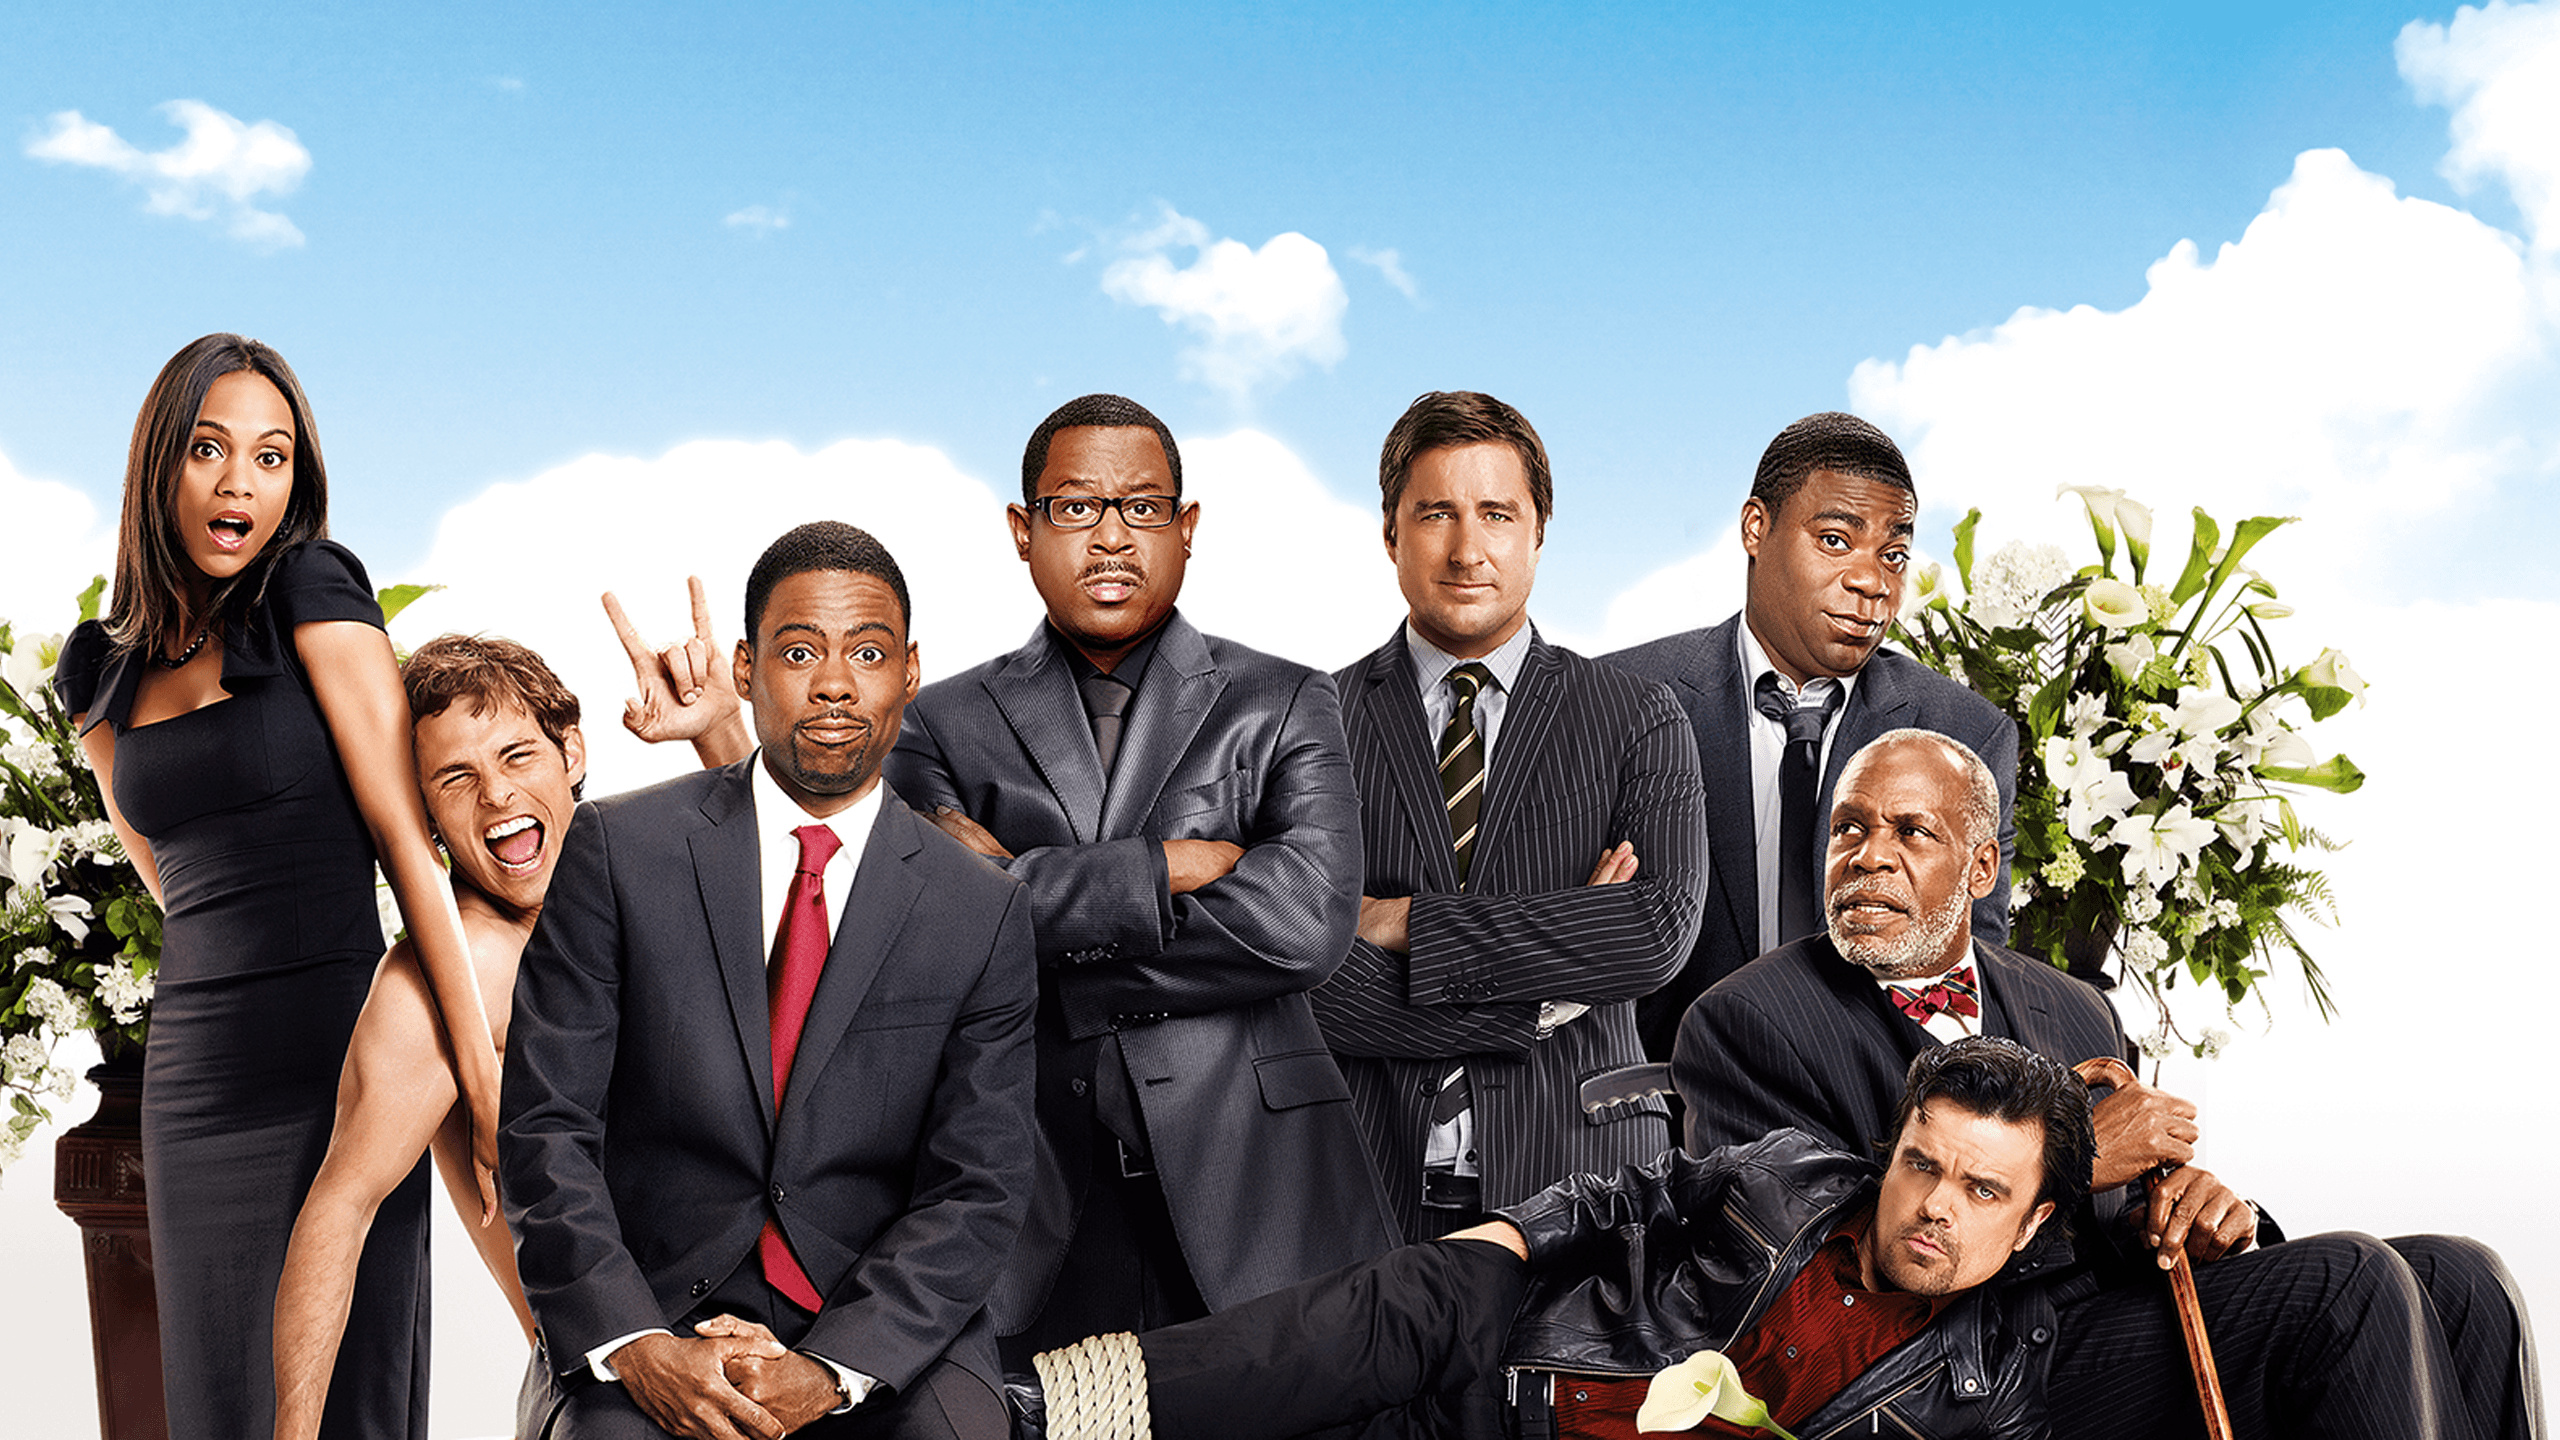 Martin Lawrence, Death at a Funeral, Movies anywhere, Comedy-drama, 2560x1440 HD Desktop